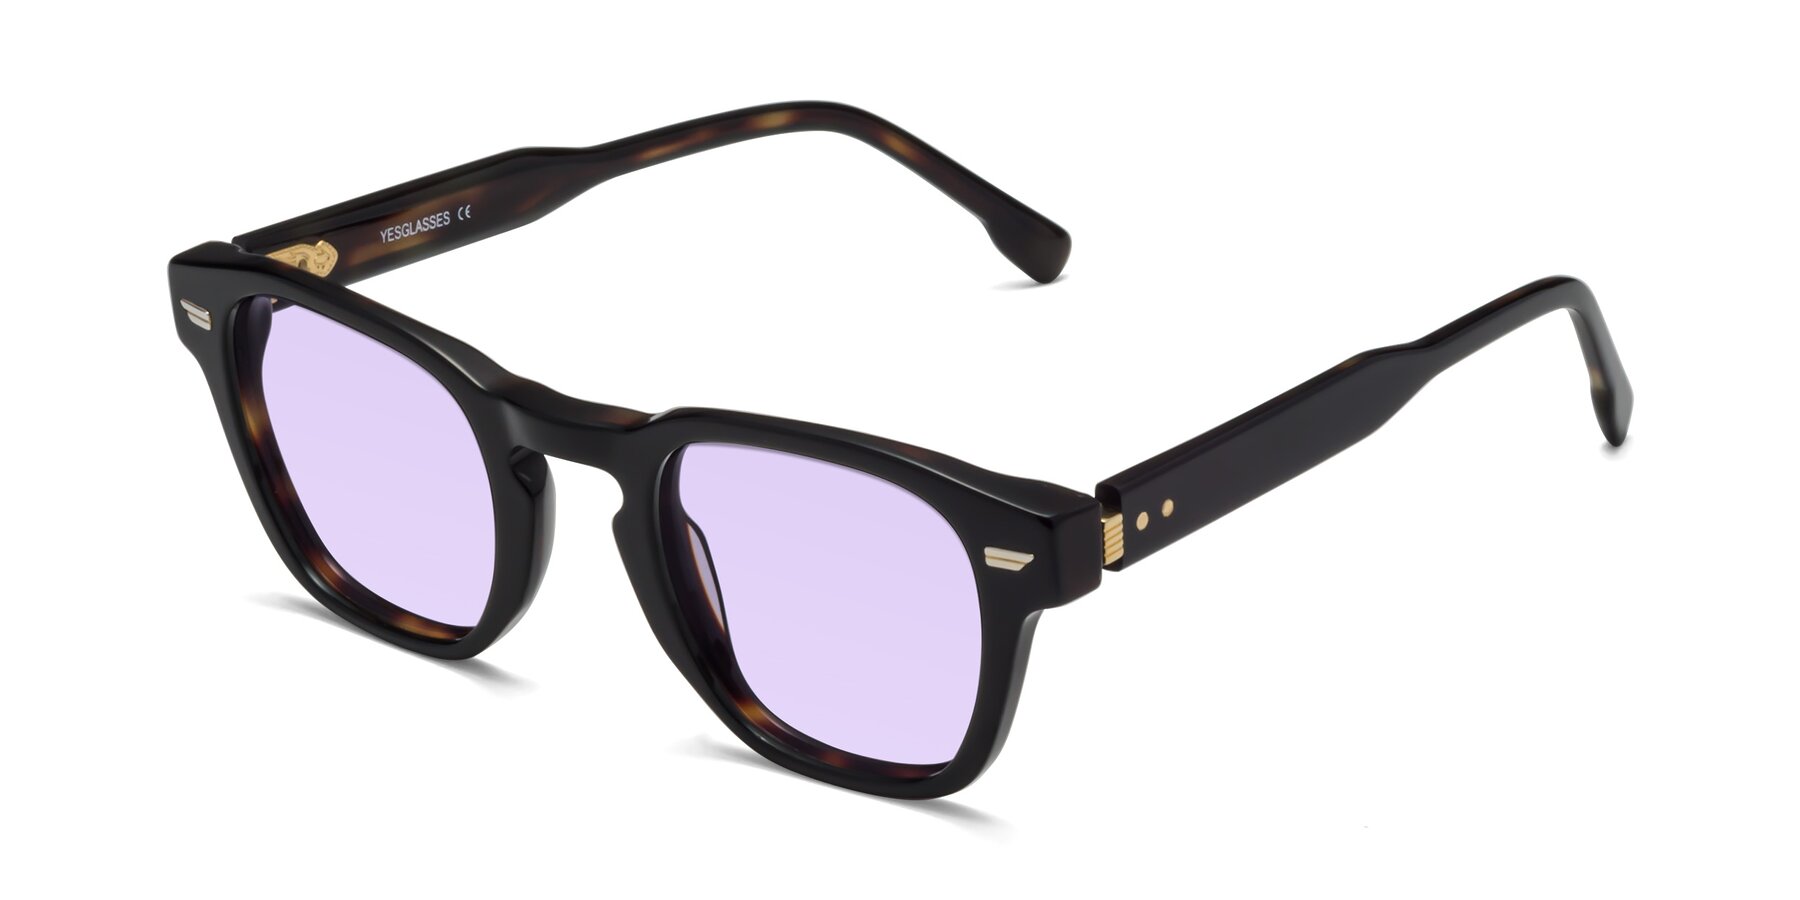 Angle of 1421 in Black-Tortoise with Light Purple Tinted Lenses